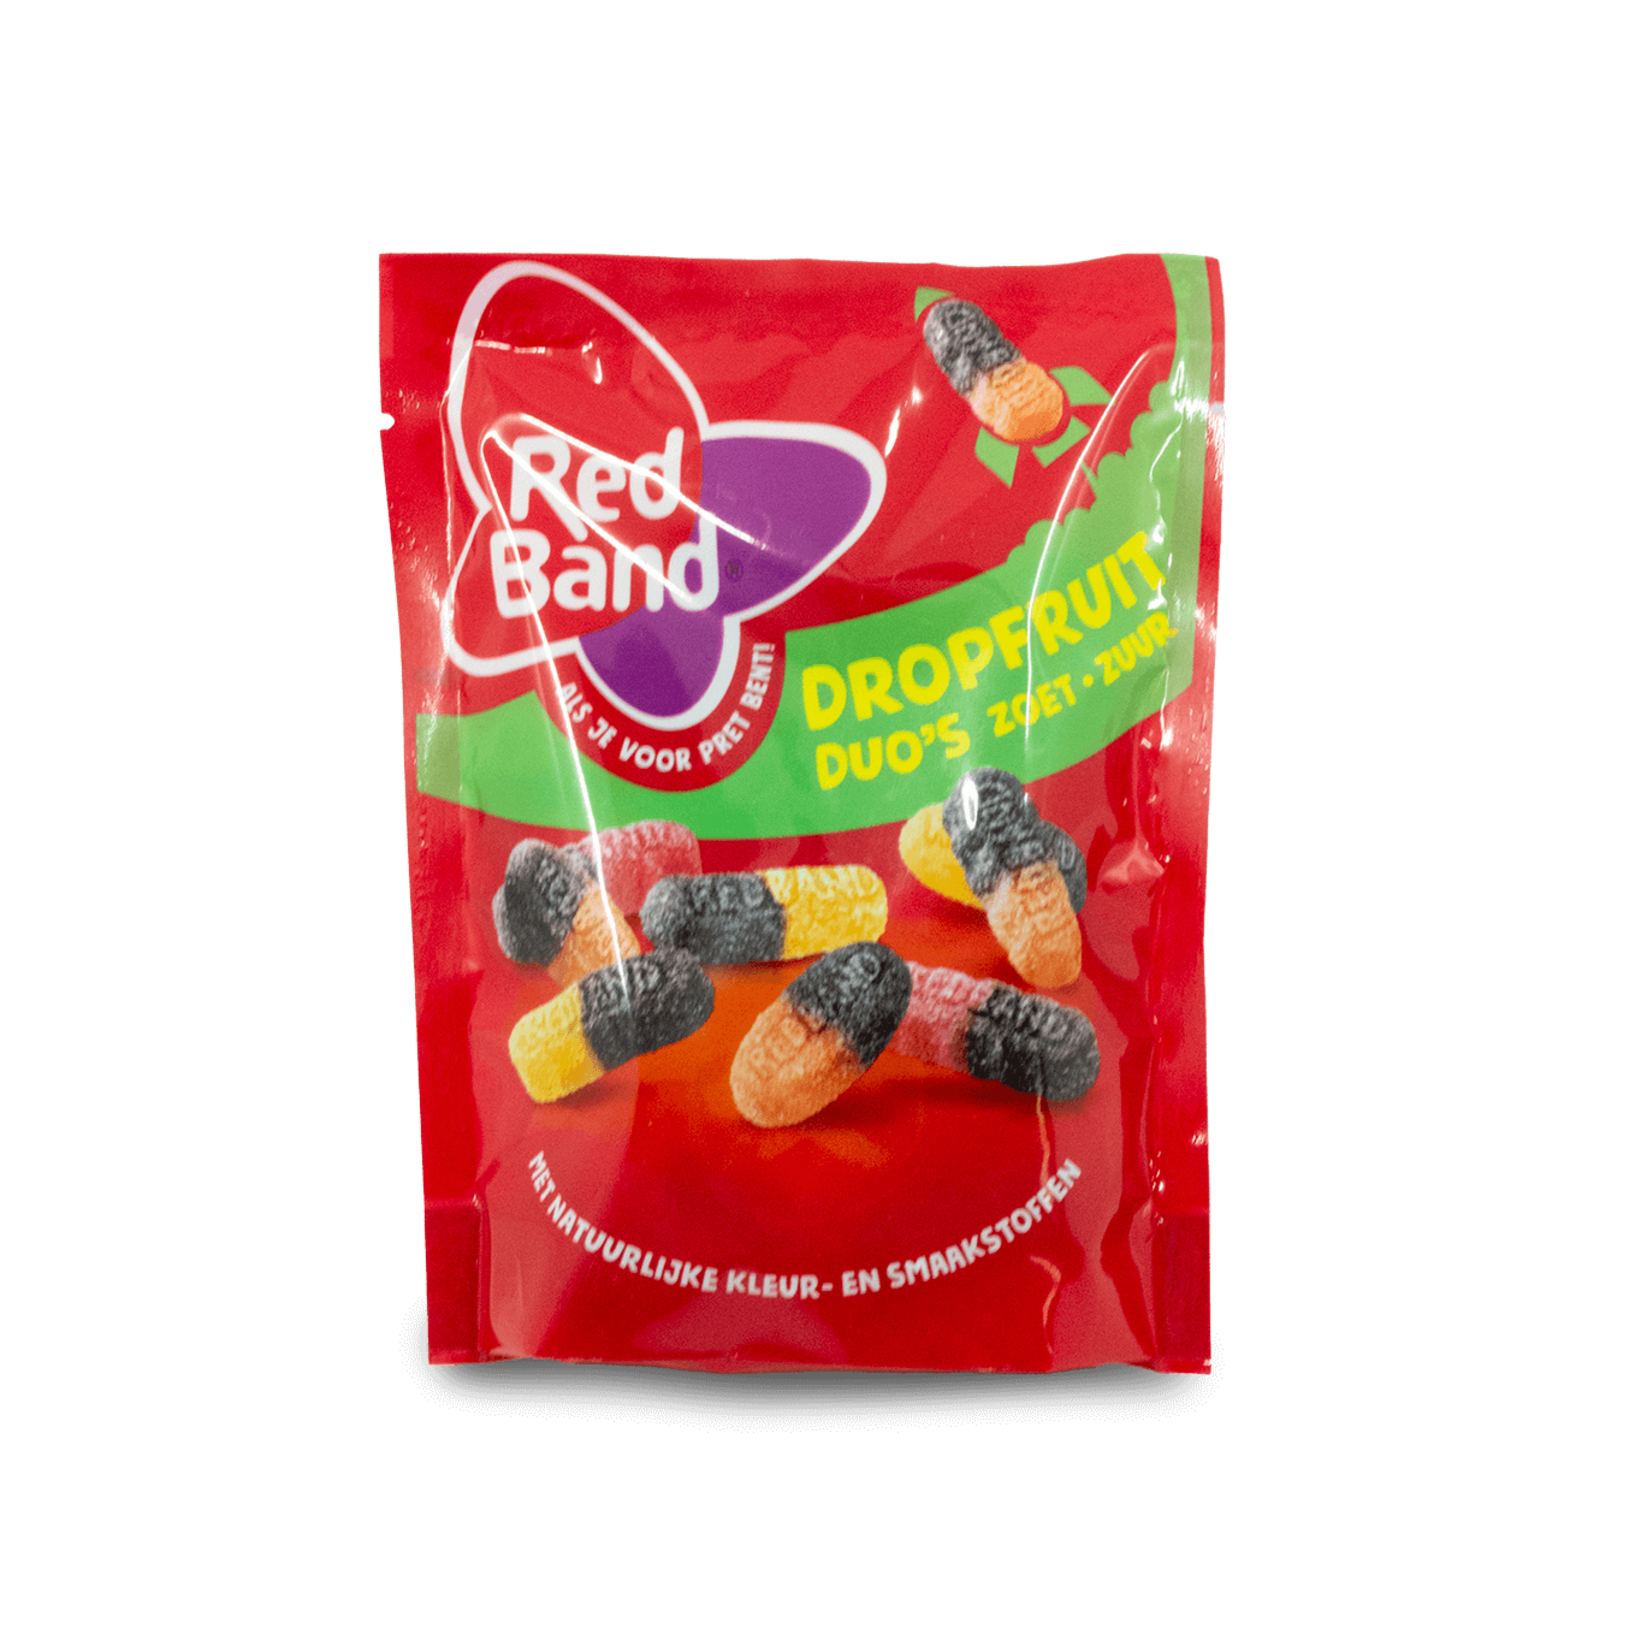 Red Band Red Band Dropfruit Duos Sweet Sour 225g